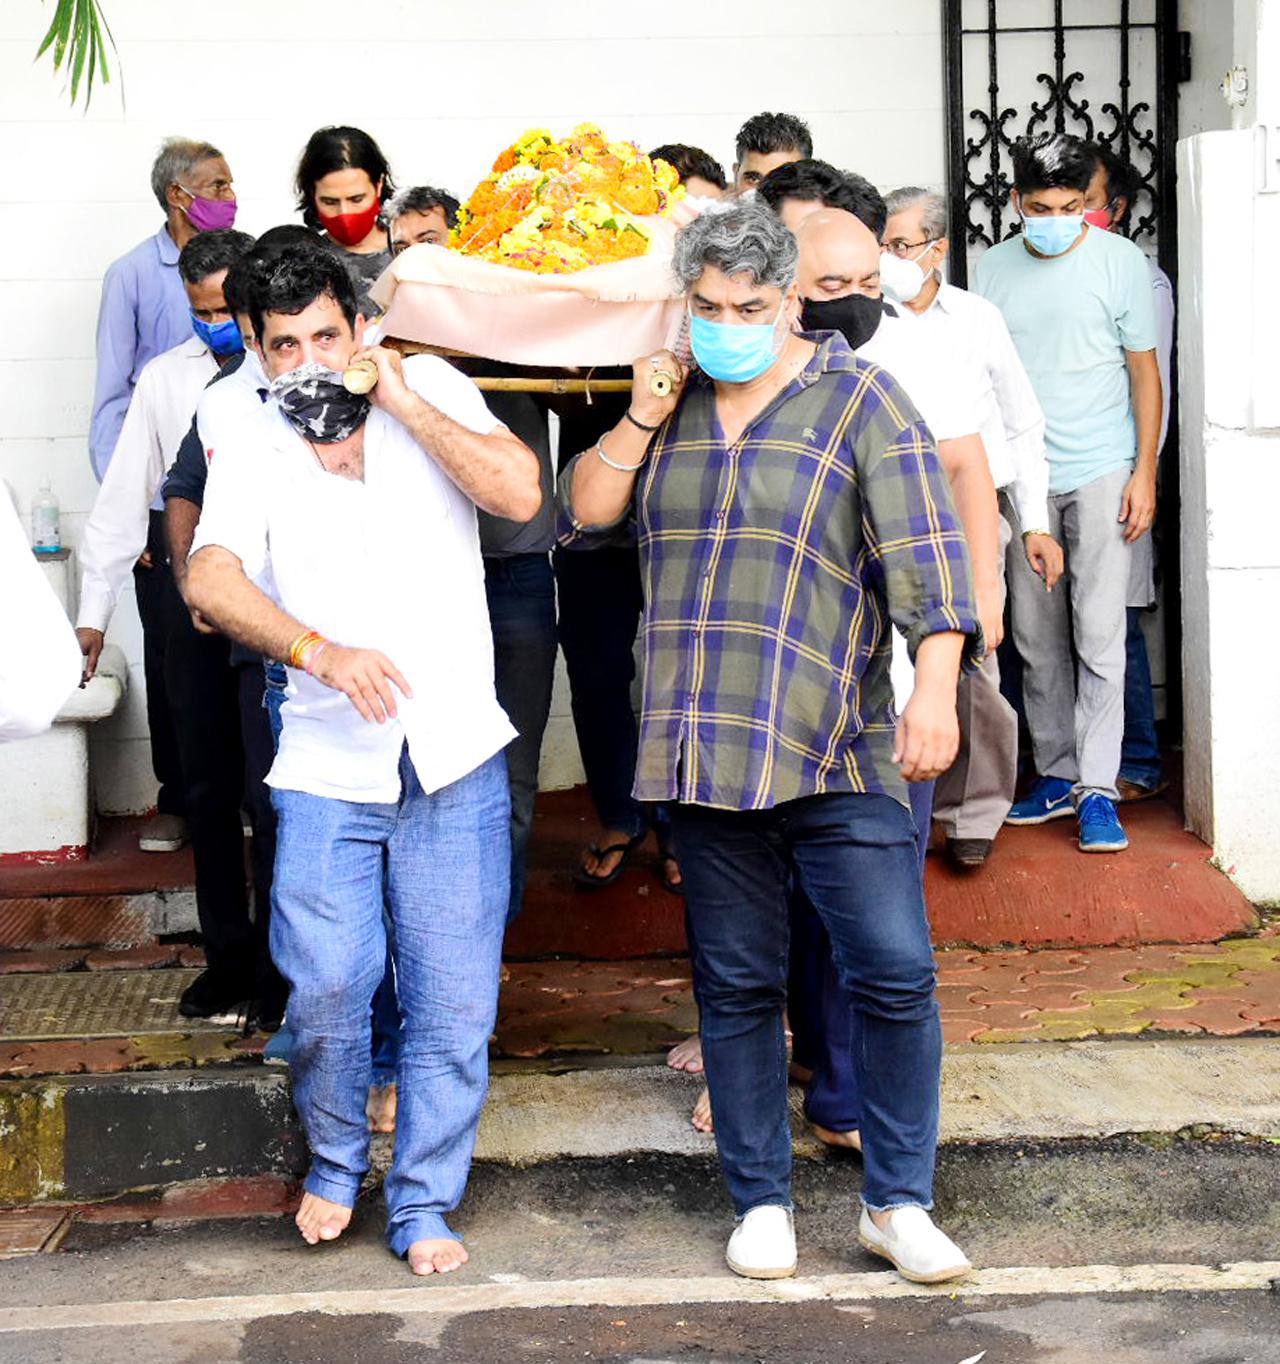 Actress Mandira Bedi's husband, filmmaker Raj Kaushal, passed away on Wednesday morning. Kaushal died of a heart attack. Several friends and industry colleagues attended the last rites of Raj Kaushal to pay their last respects at a crematorium in Dadar, Mumbai.